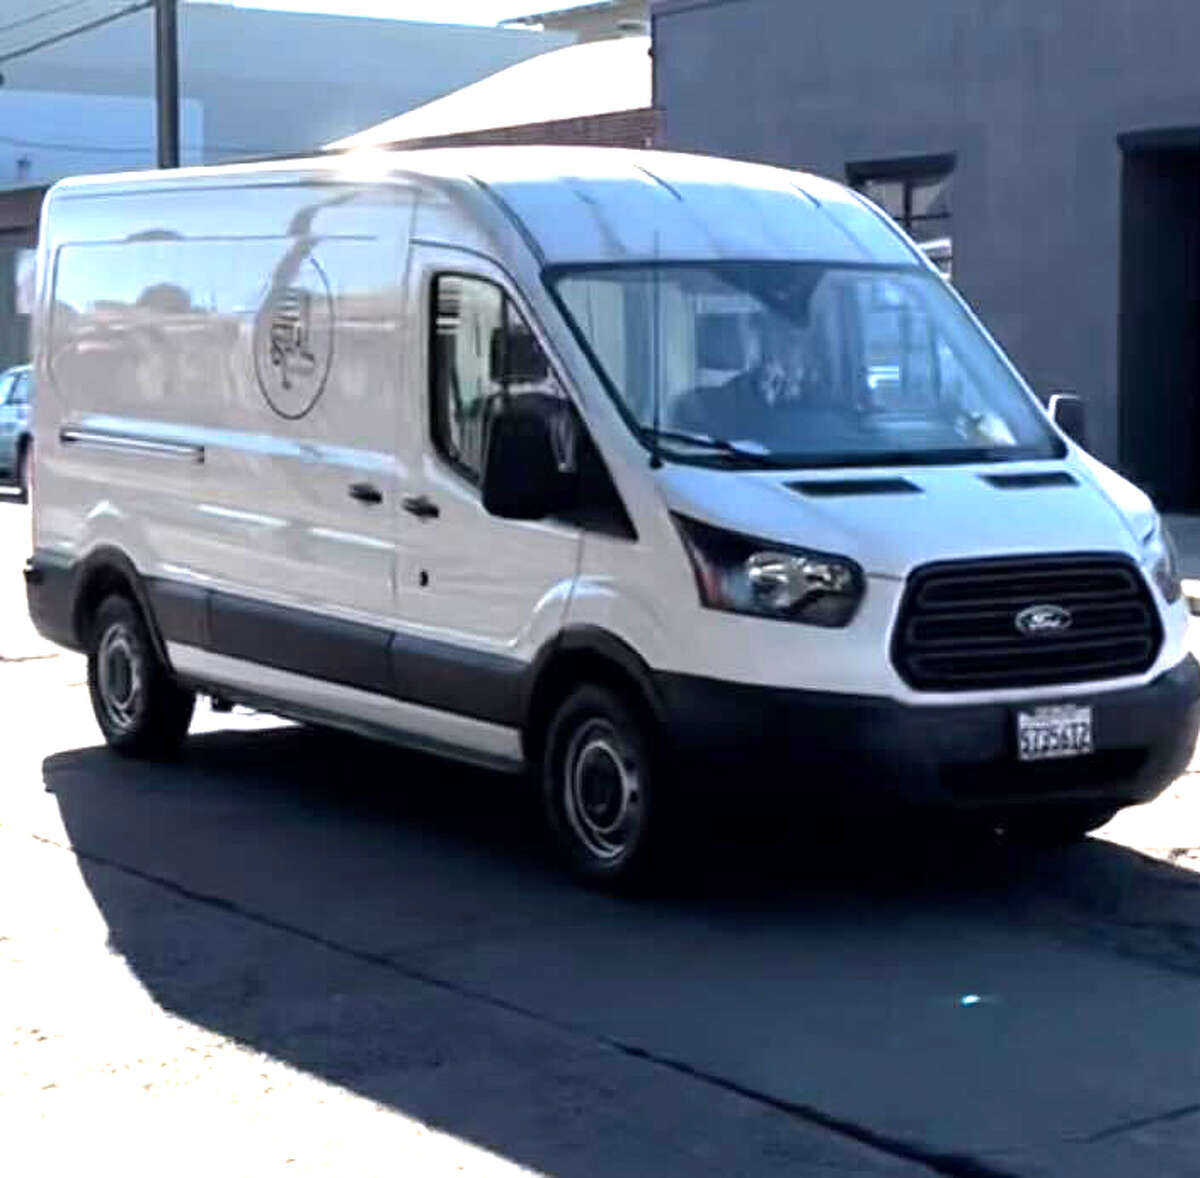 Temescal Brewing's white 2019 Ford Transit delivery van was reportedly stolen from its Jack <a class=